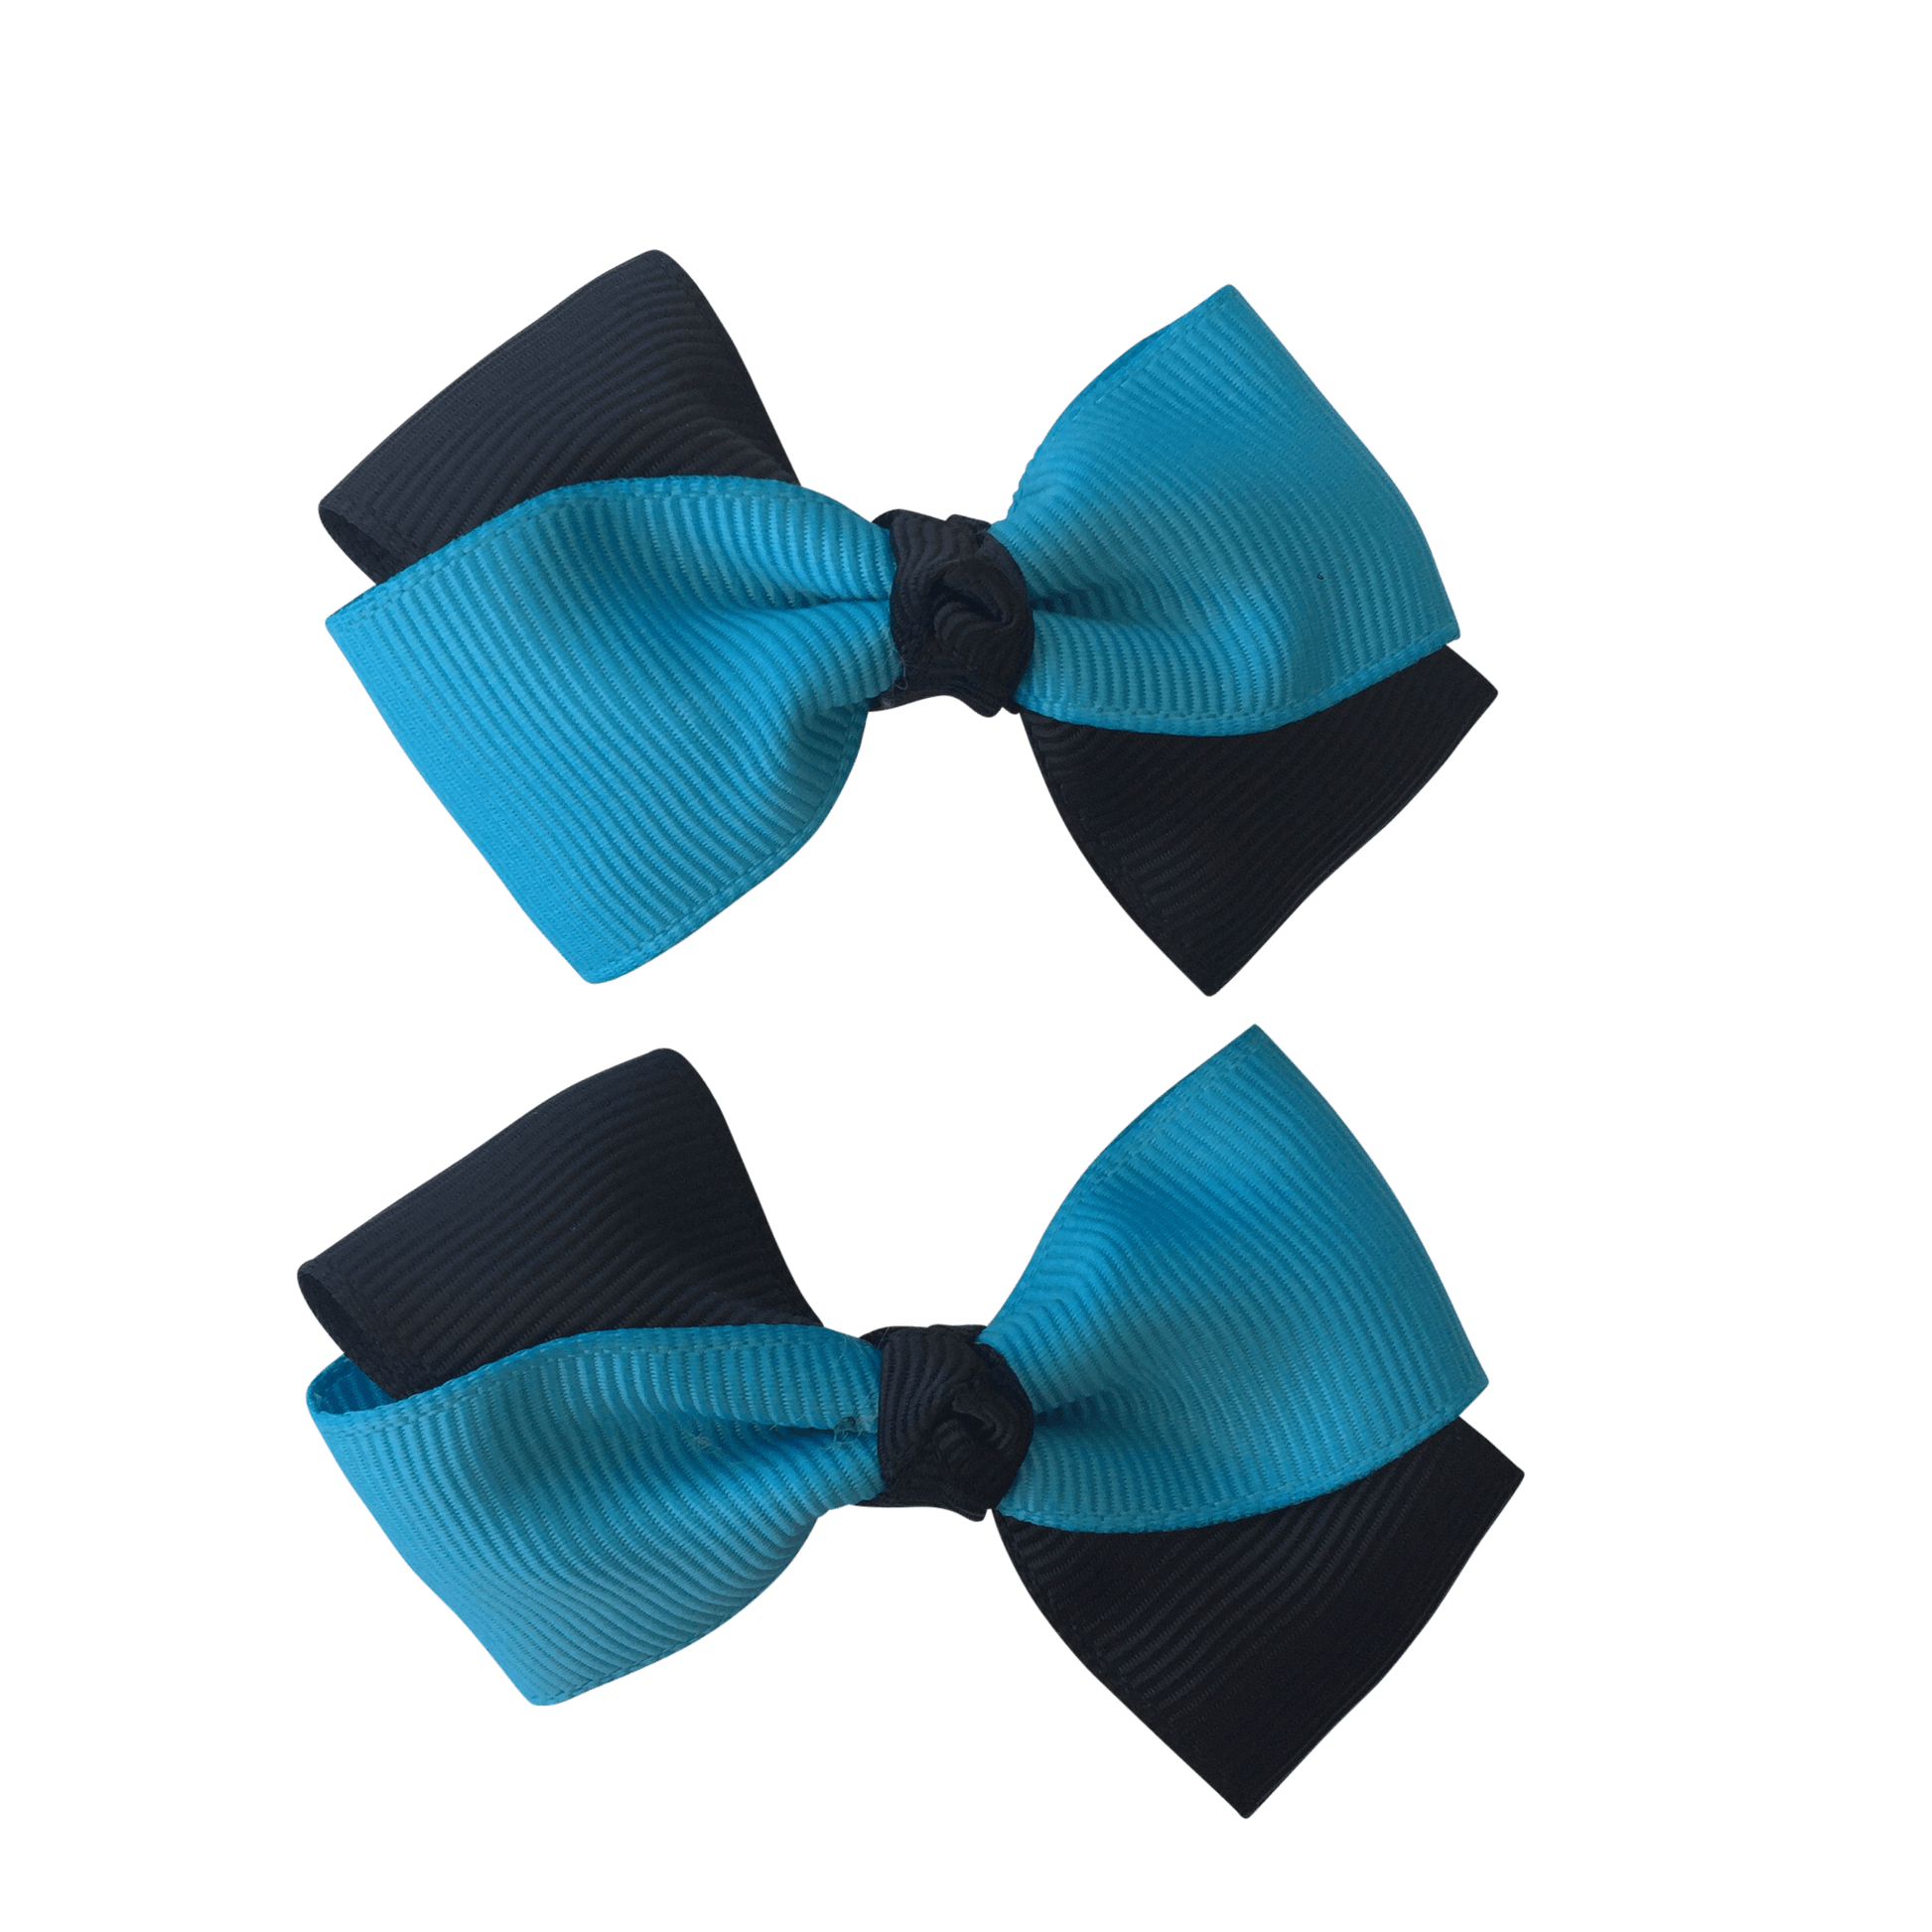 Turquoise & Black Hair Accessories - Ponytails and Fairytales